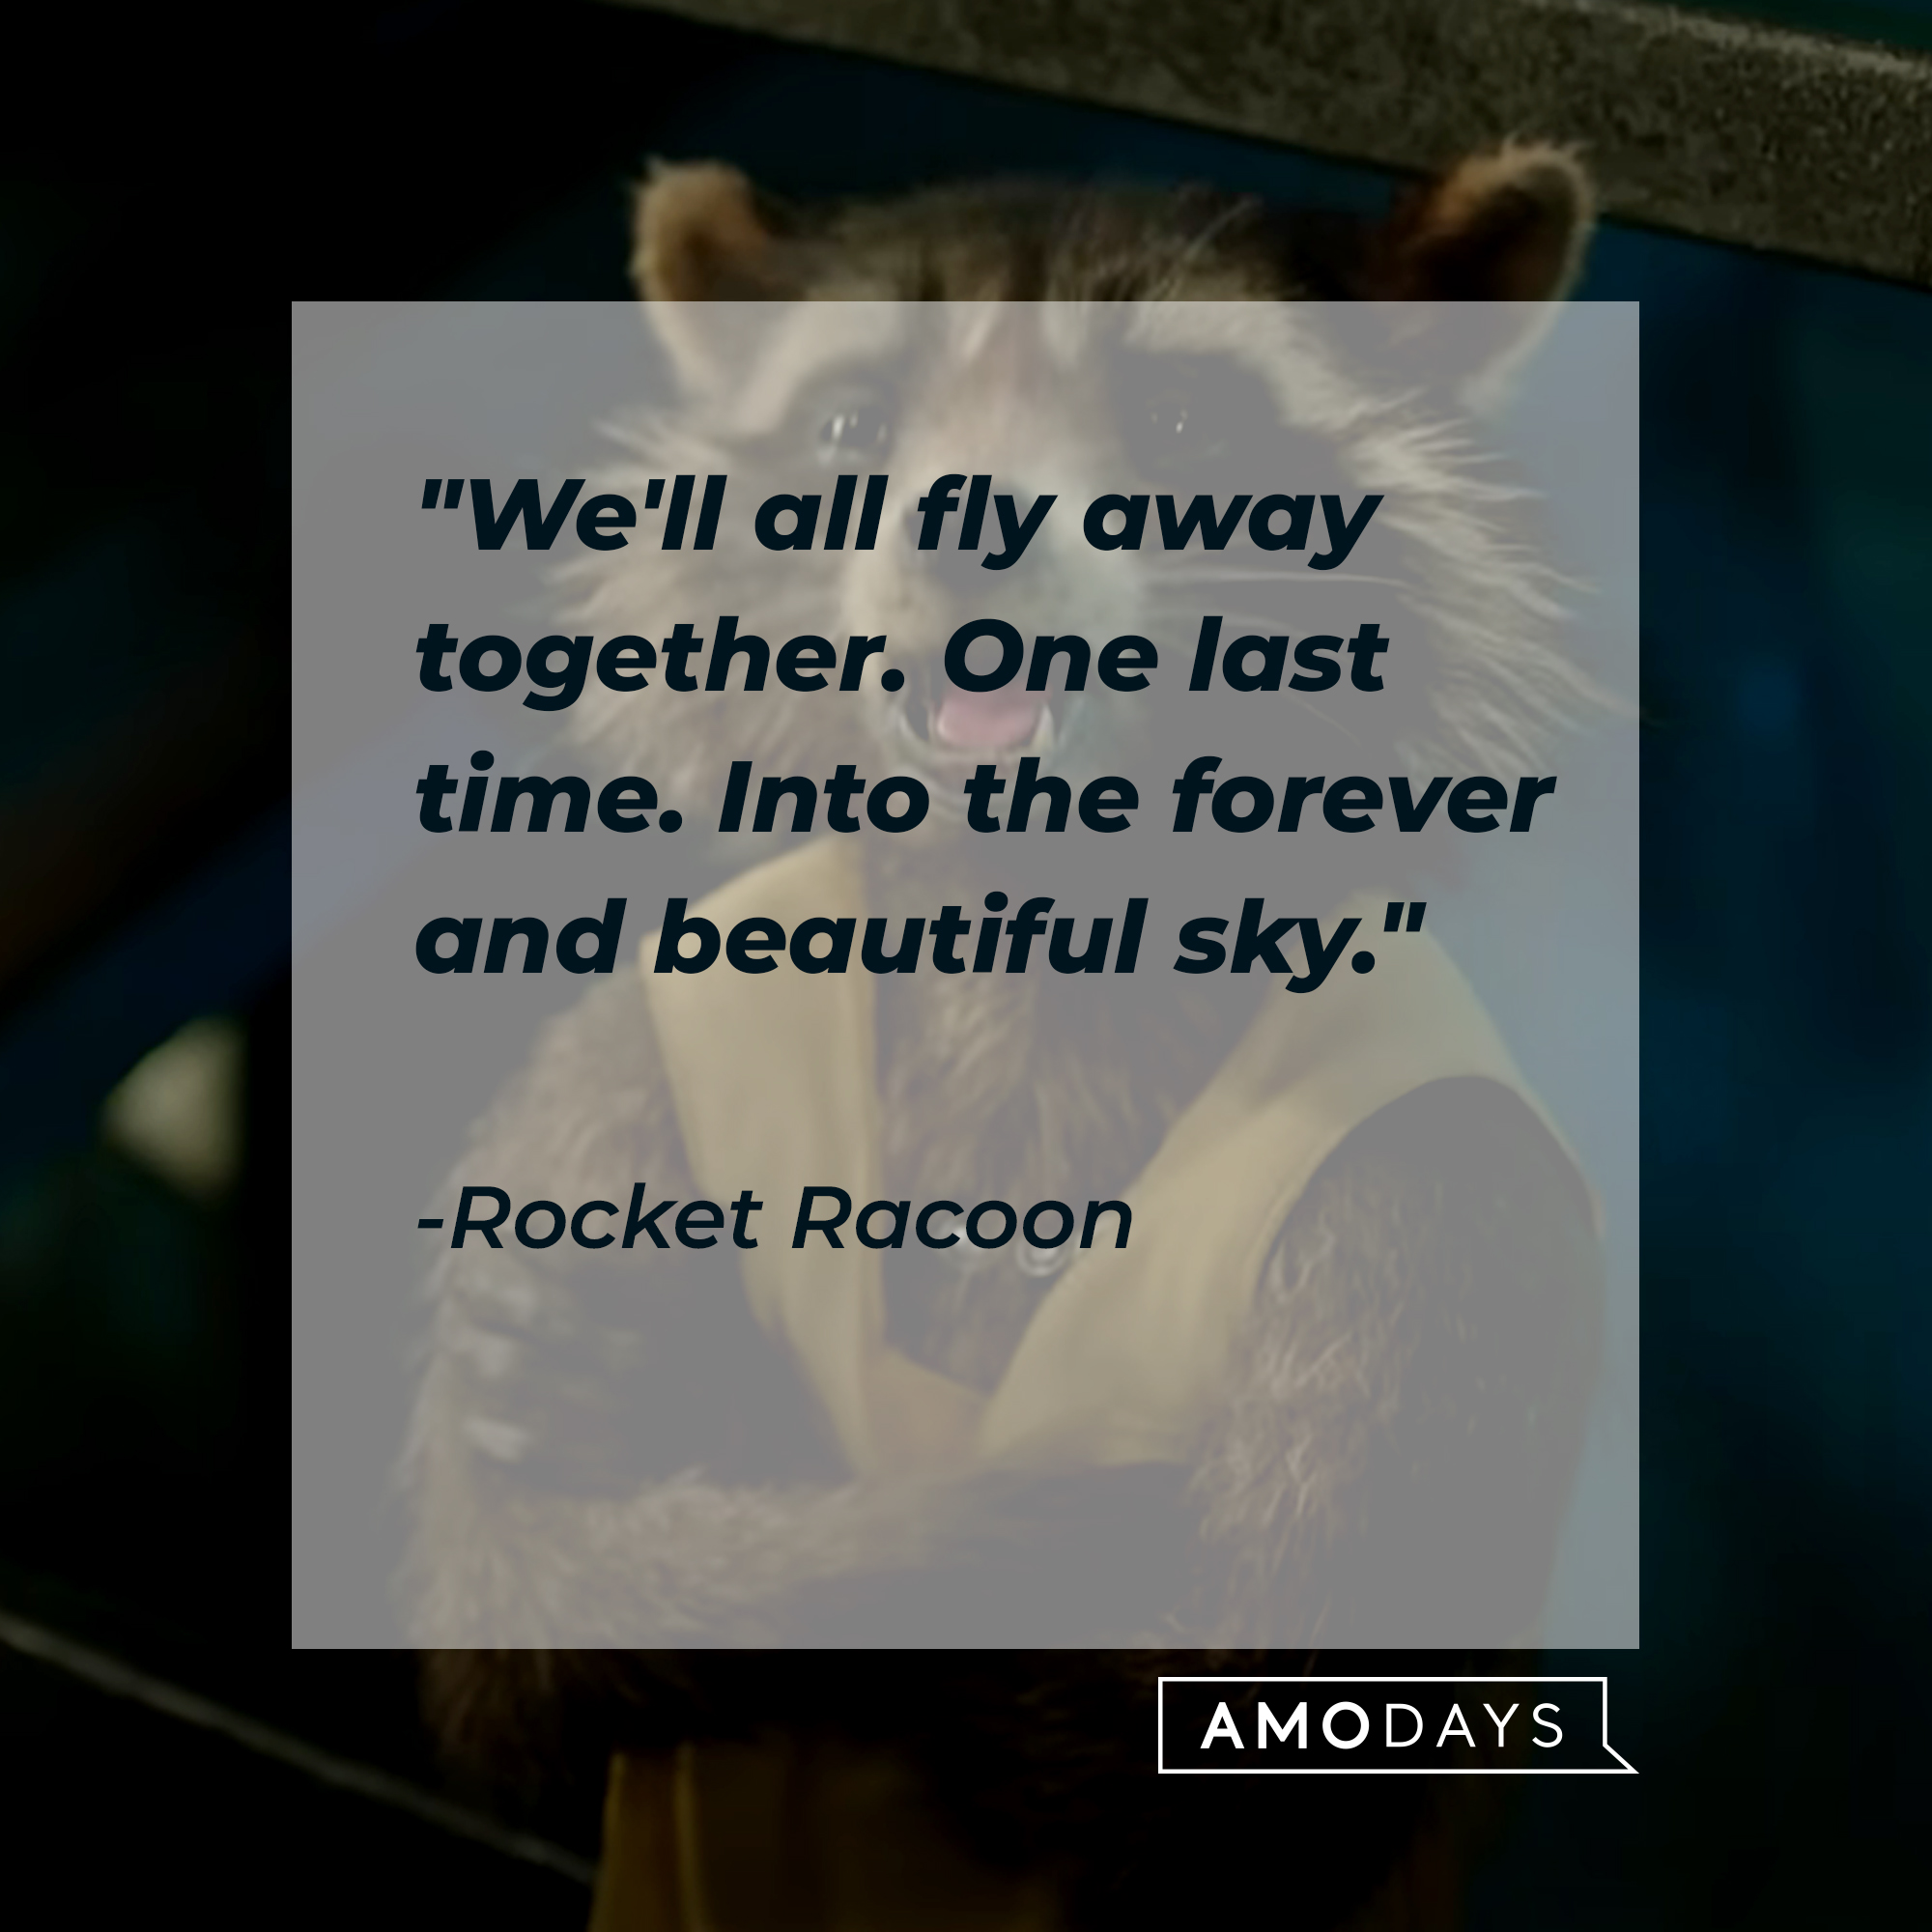 Rocket Raccoon's quote, "We'll all fly away together. One last time. Into the forever and beautiful sky." | Image: youtube.com/marvel